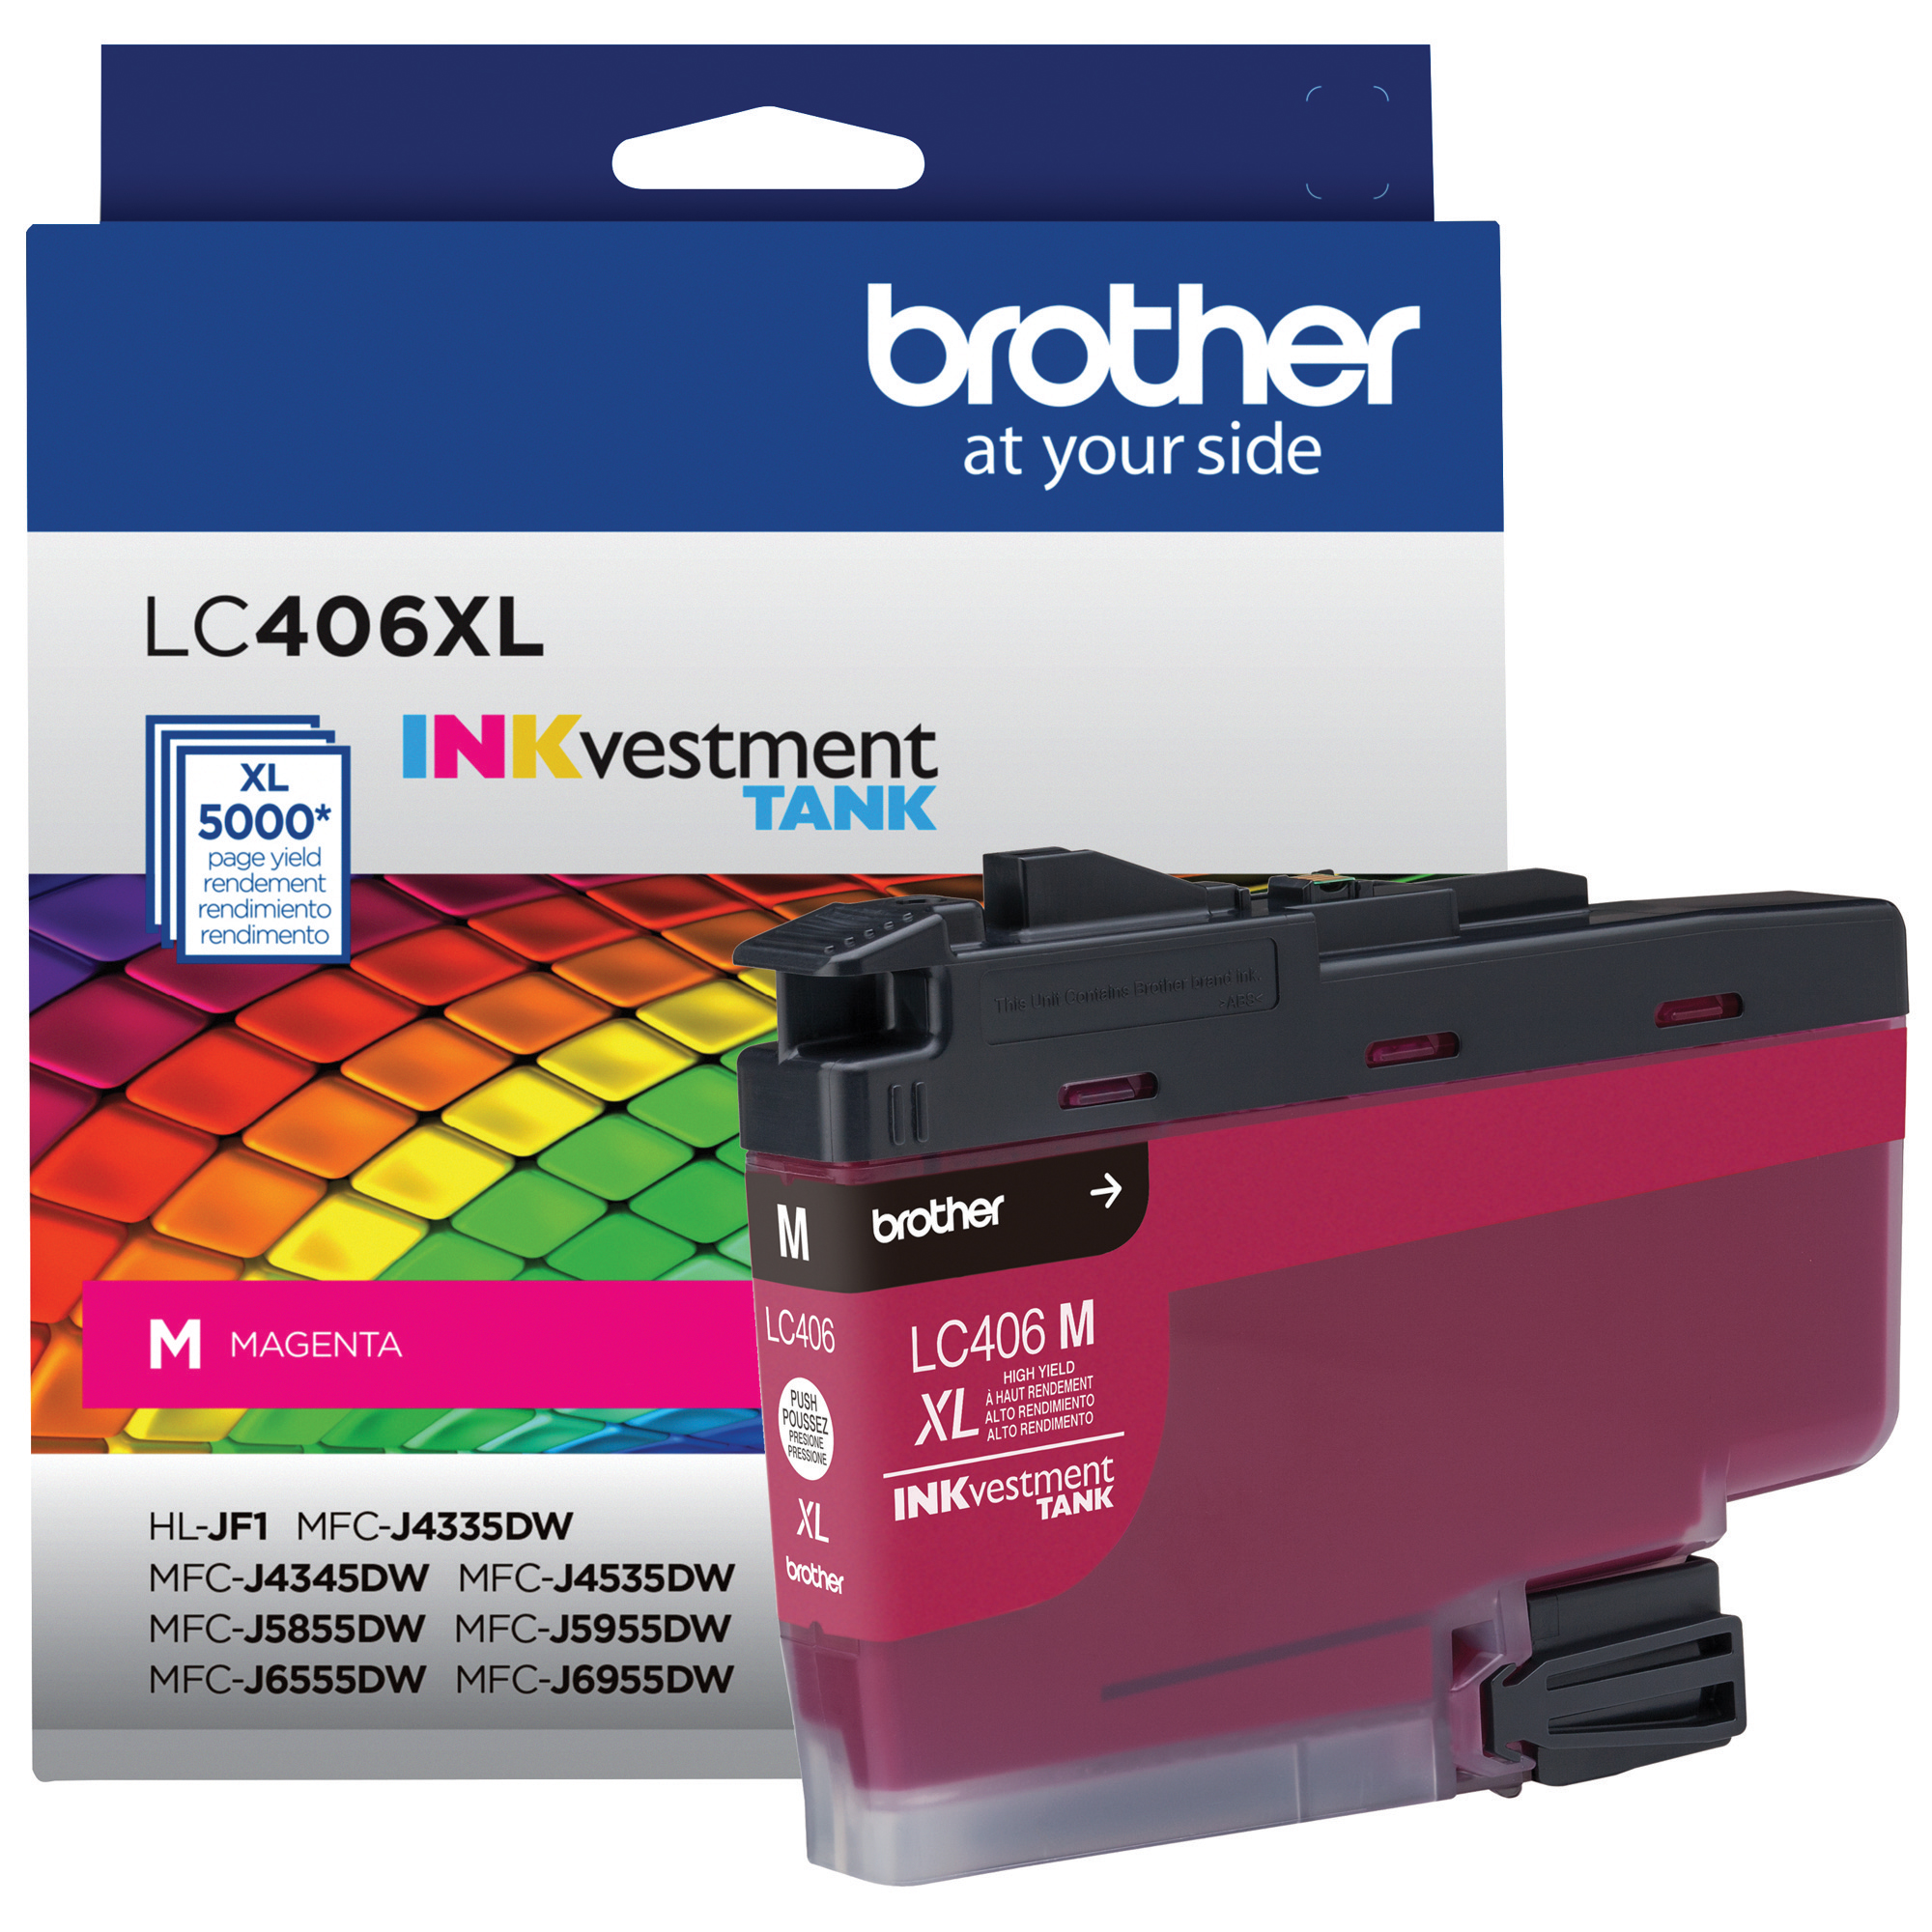 

Brother INKvestment Tank High-yield Ink, Magenta, Yields approx 5,000 pages